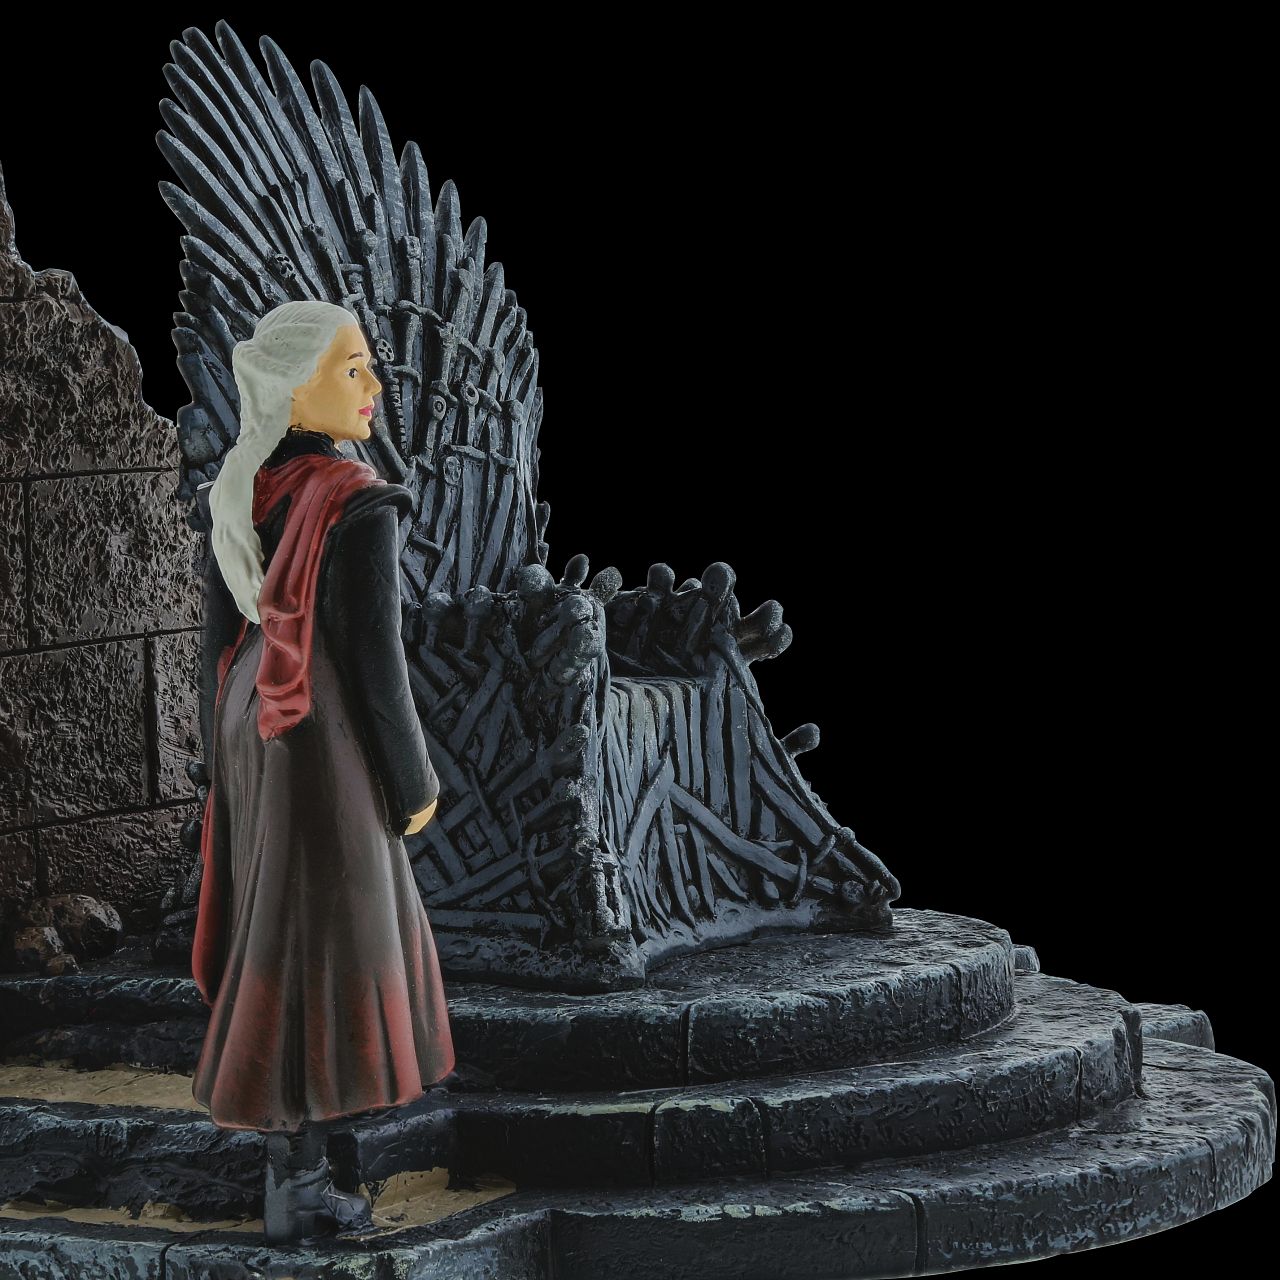 Dept 56 Daenerys Targaryen Figurine - Game of Thrones  Daenerys of the House Targaryen, the First of Her Name, Breaker of Chains and Mother of Dragons has been immortalised in this highly detailed figurine. Captured in this iconic scene from series 8 of Game of Thrones.